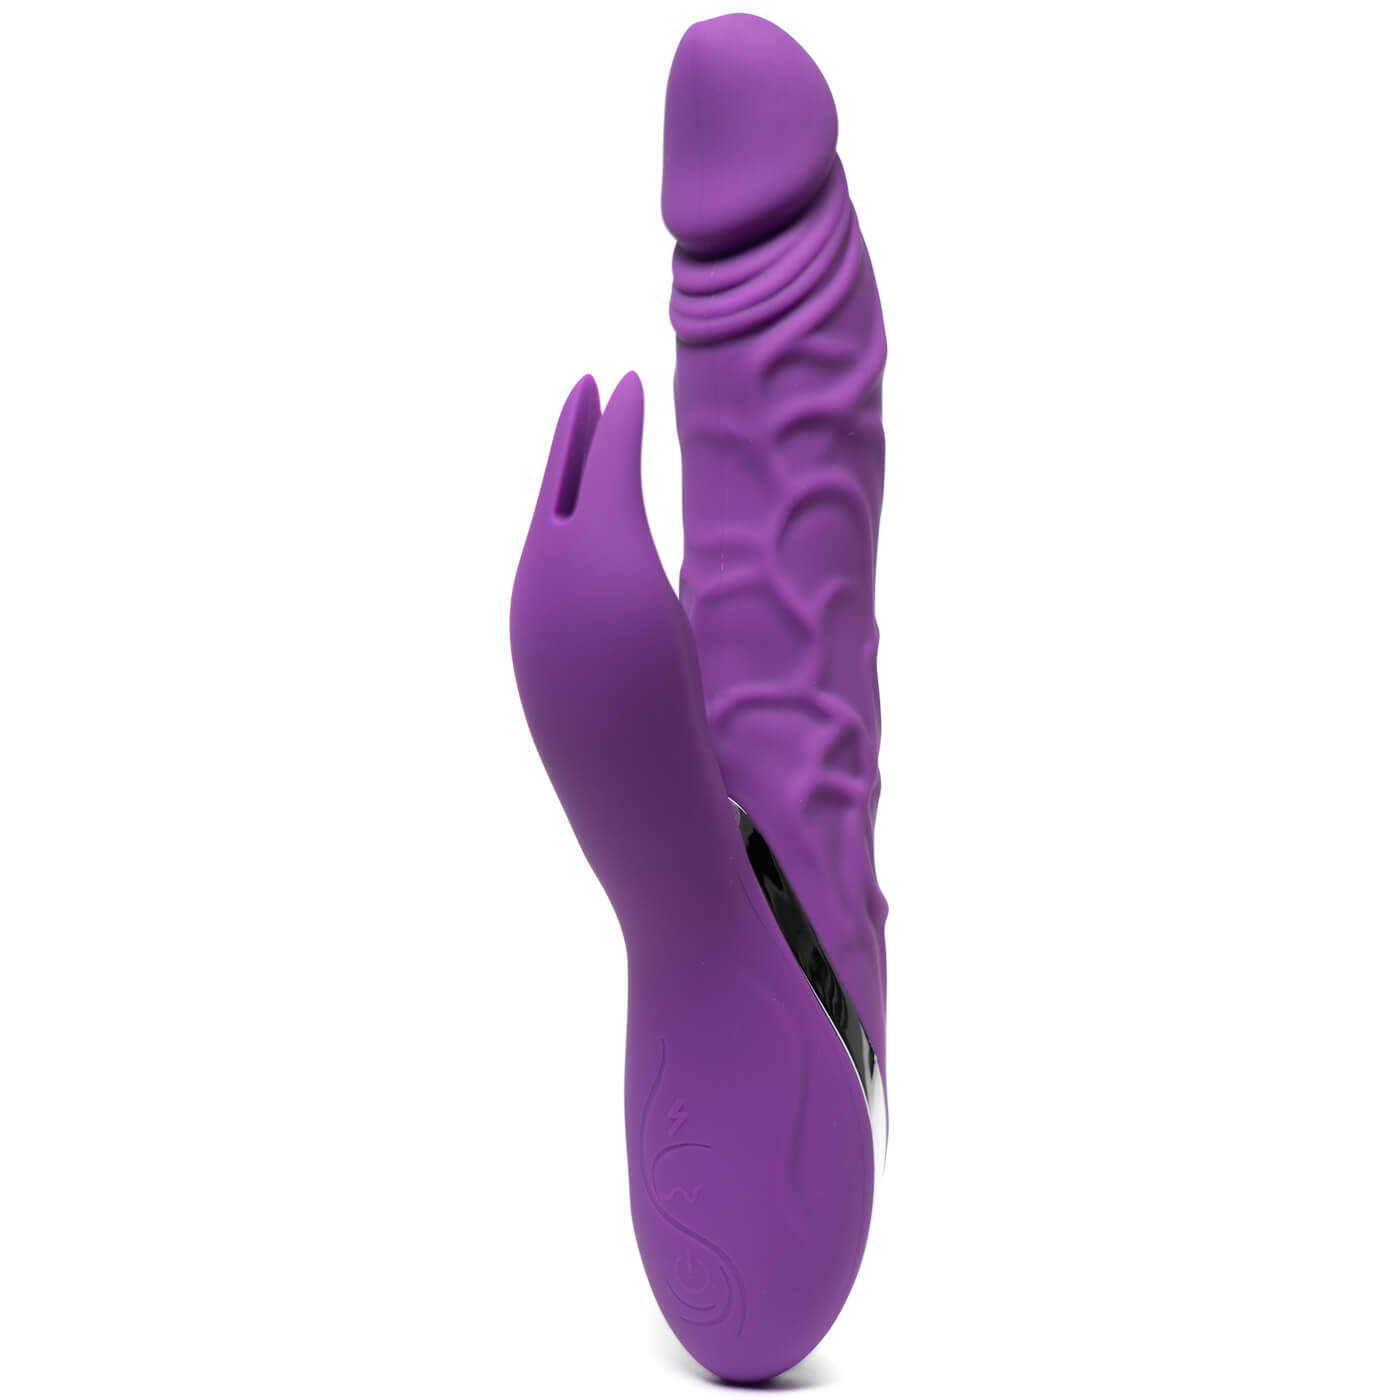 DUALITY 10 Function Rotating Rechargeable Dual Motor Realistic G-Spot Rabbit Vibrator